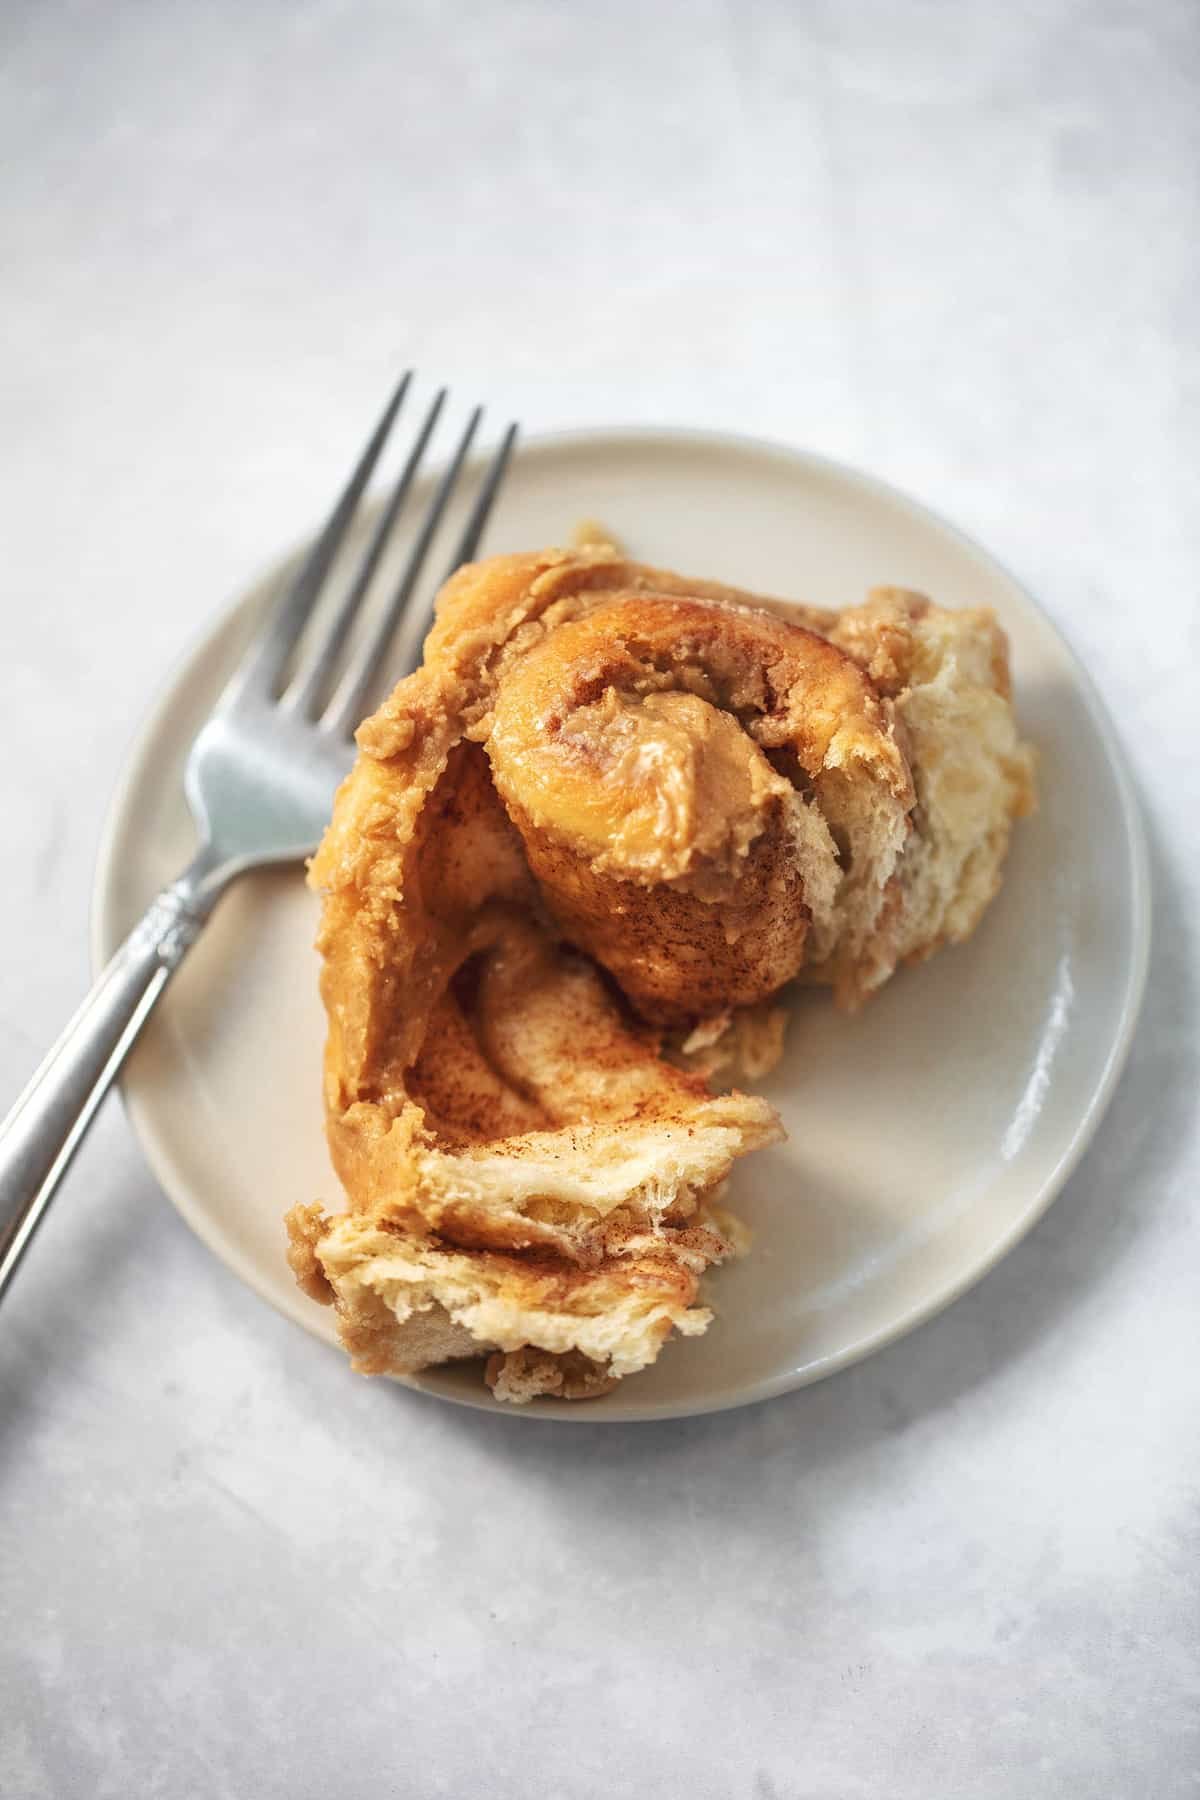 a cinnamon roll with brown sugar frosting with a bite missing and a fork on the side both on a plate.